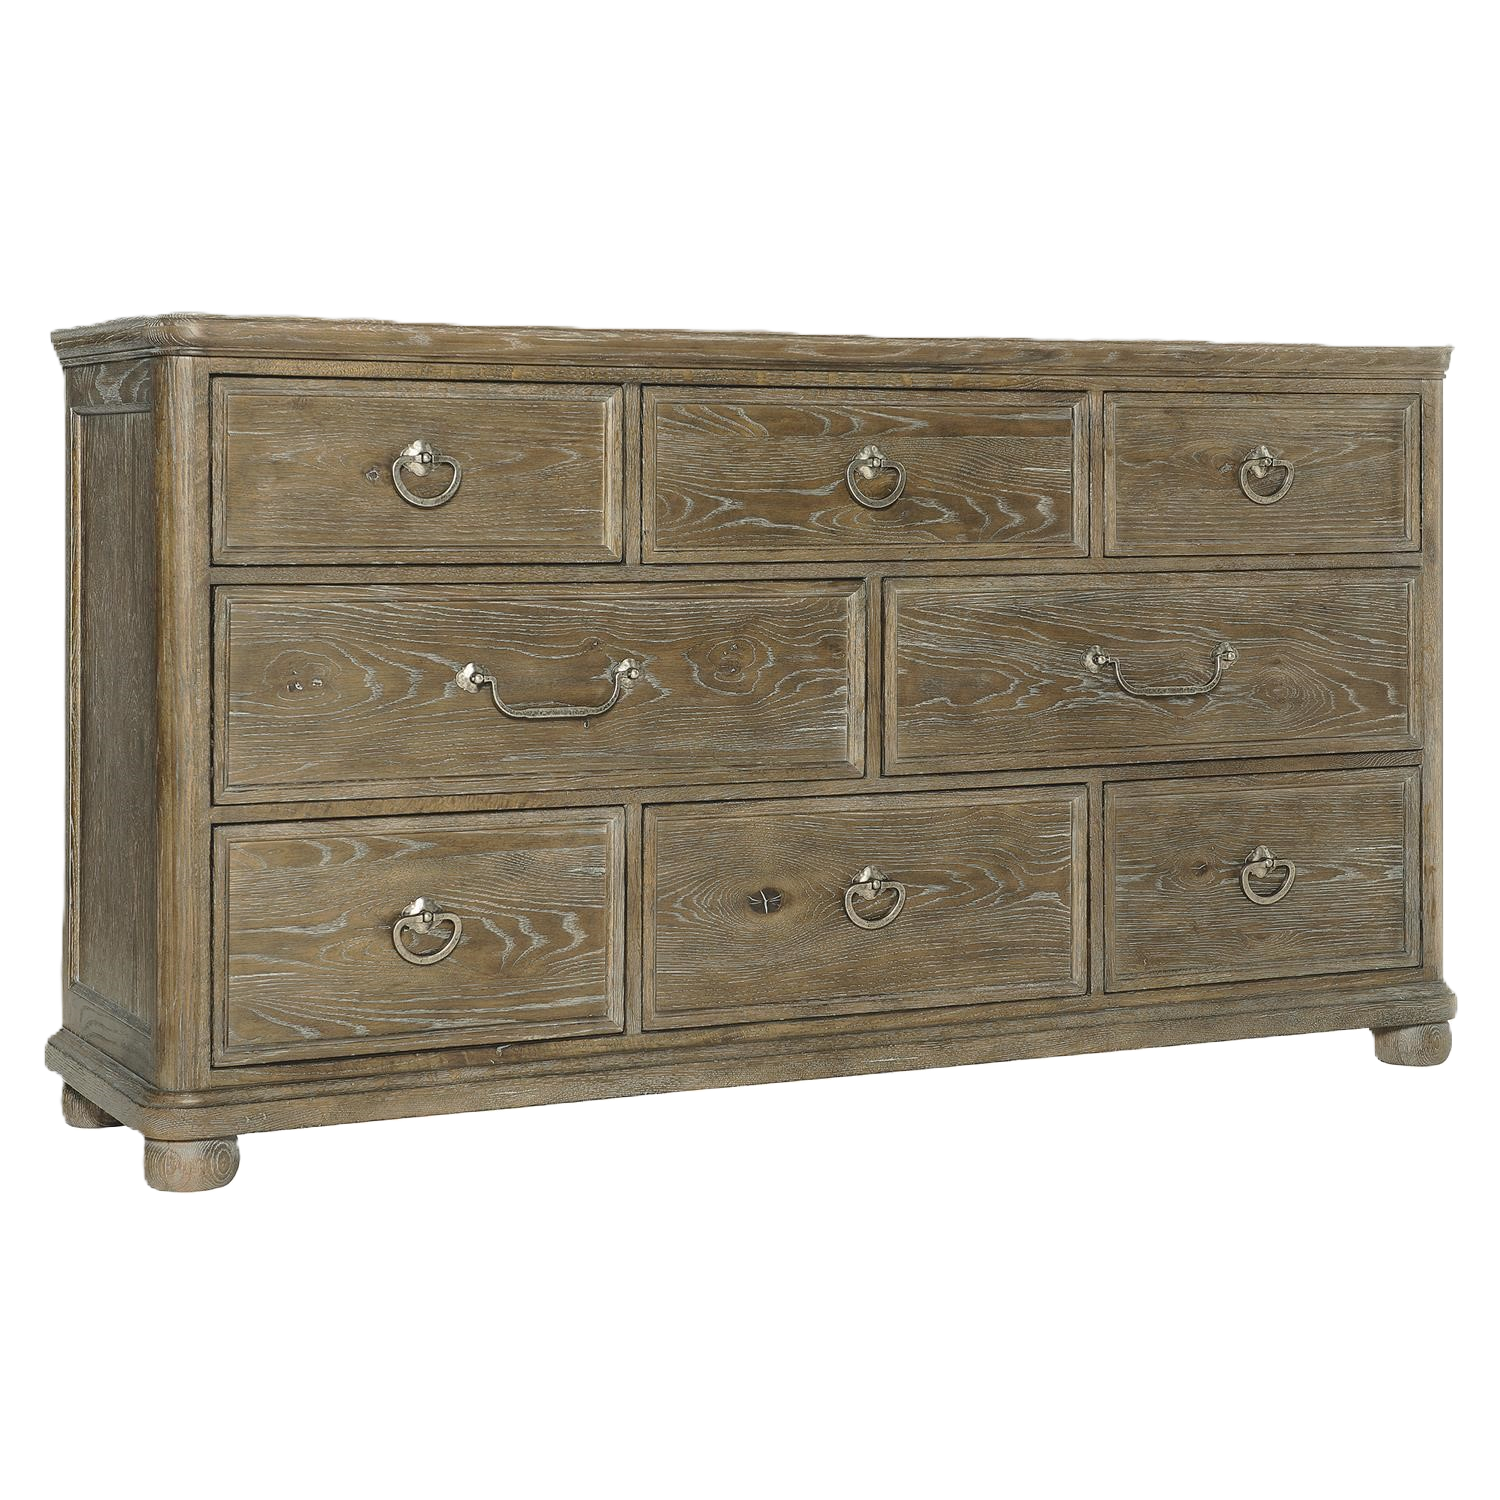 a large wooden dresser with many drawers